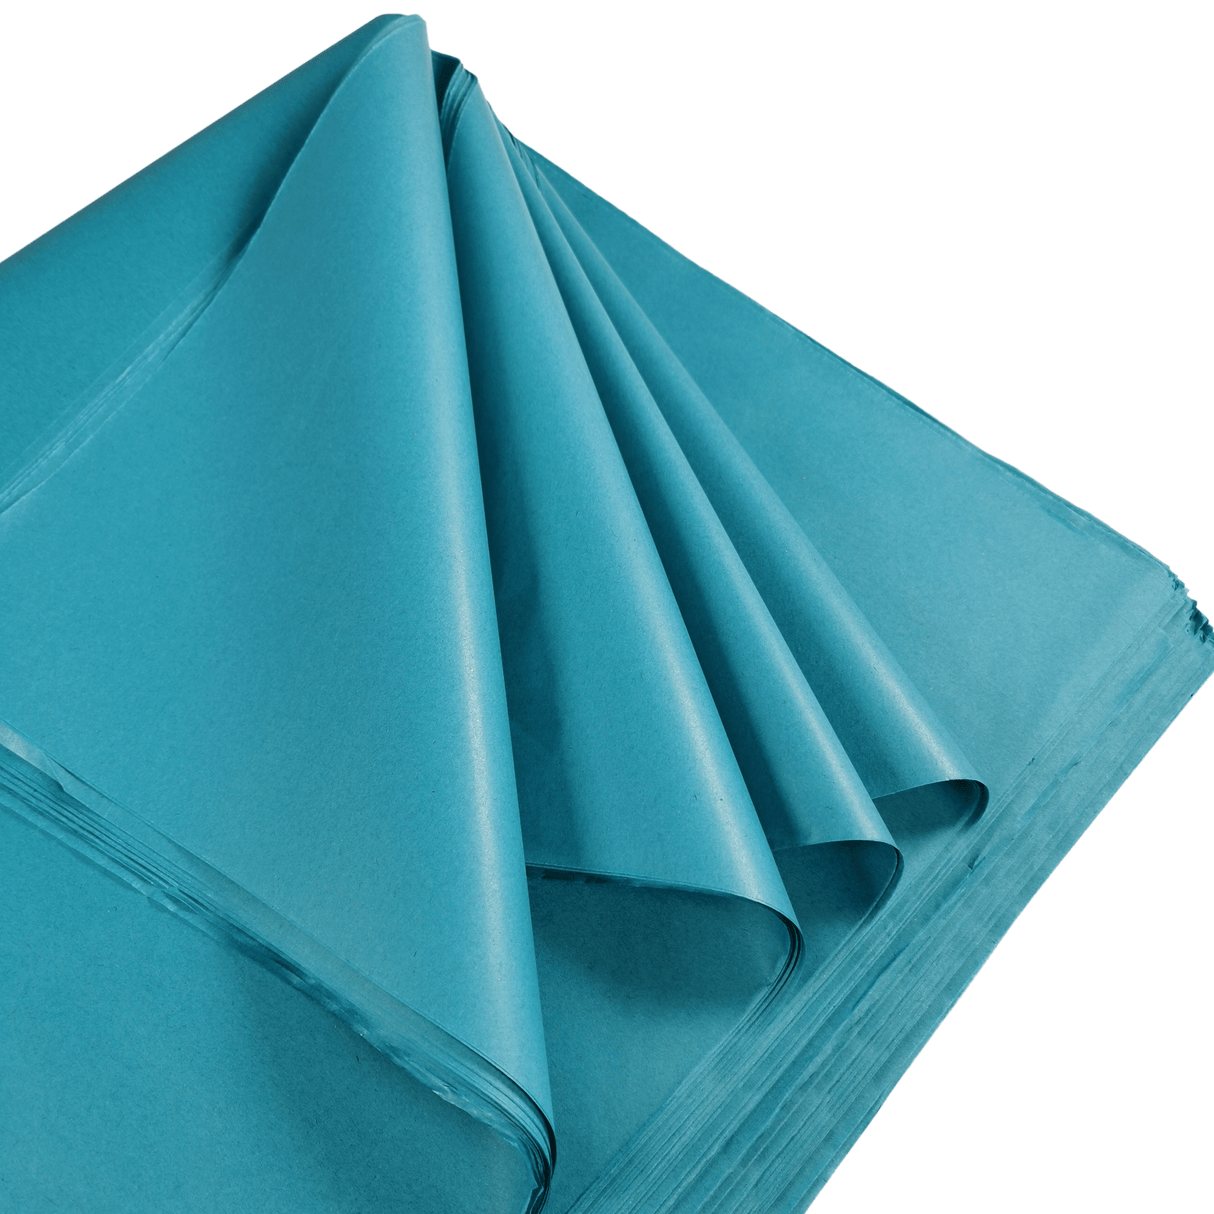 Turquoise Tissue Paper Folds 1